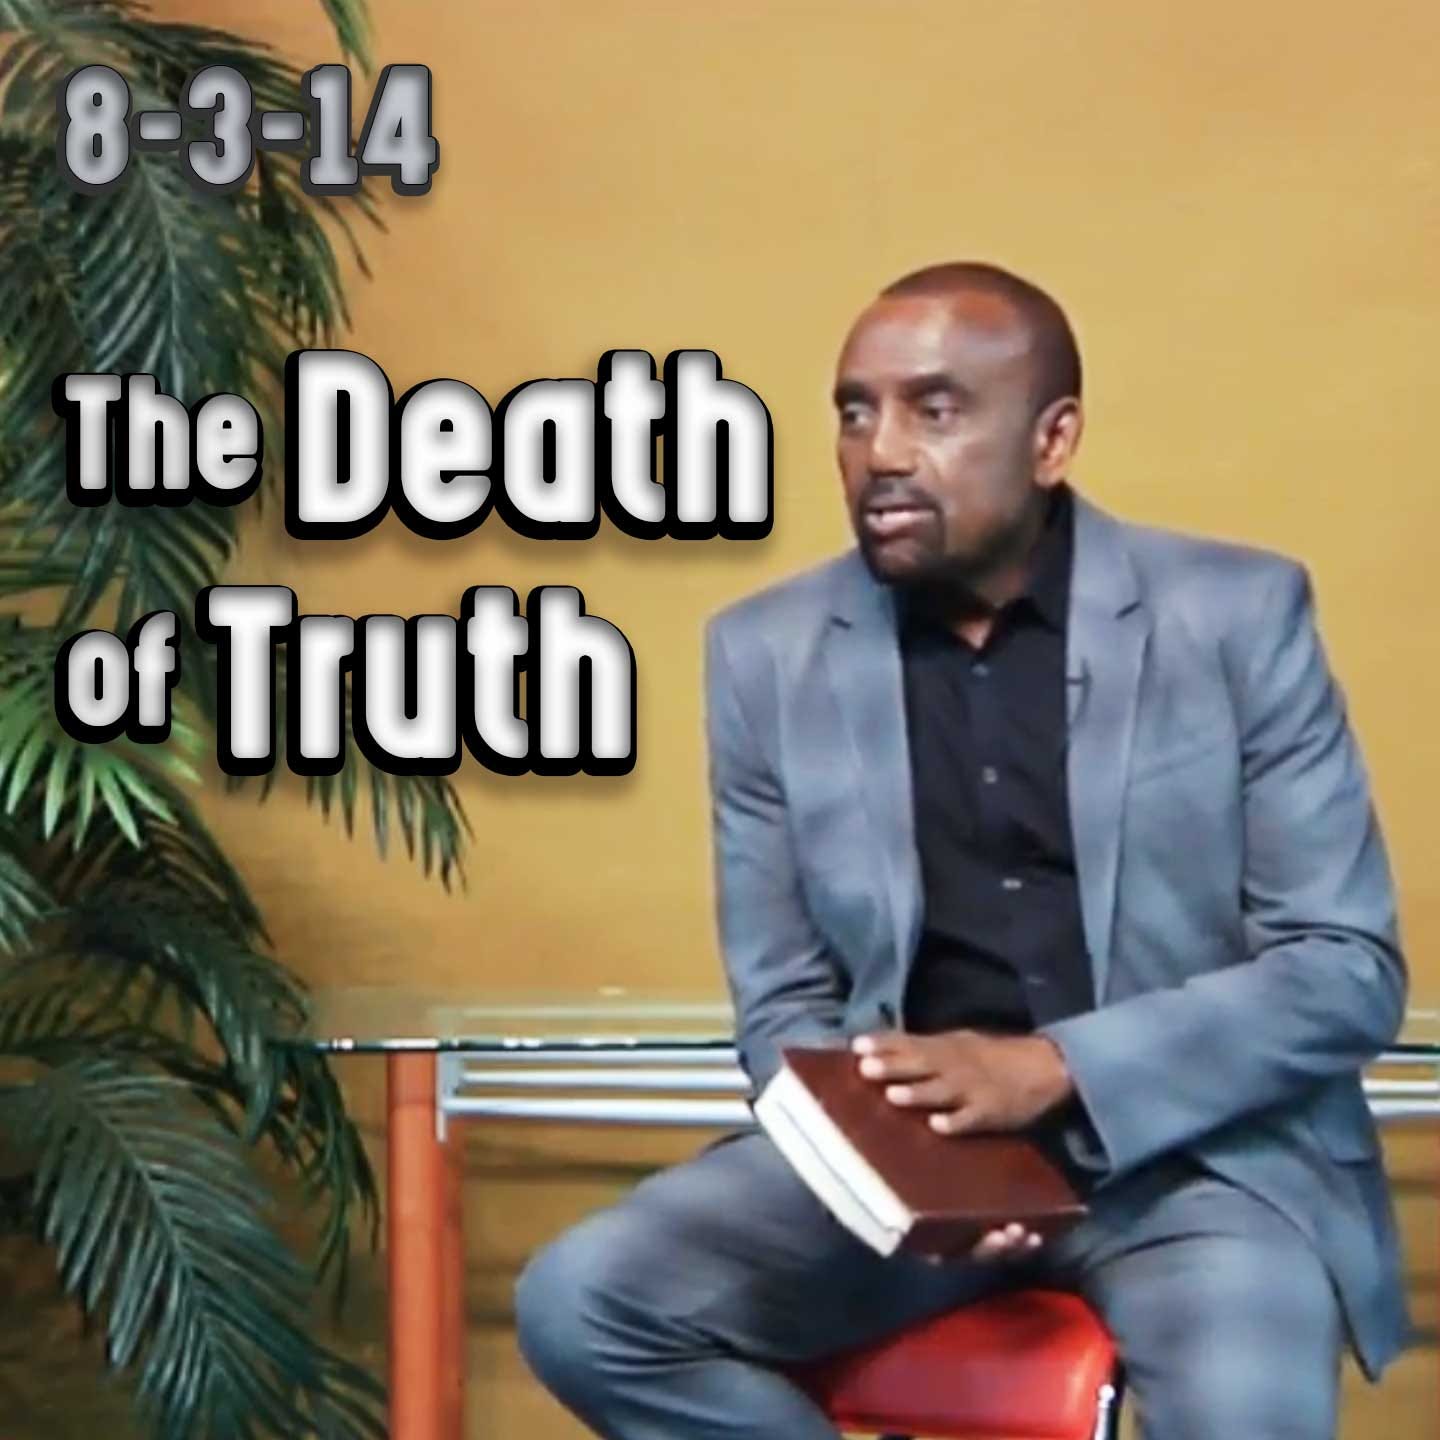 The Death of Truth in America | Archive 8/3/14